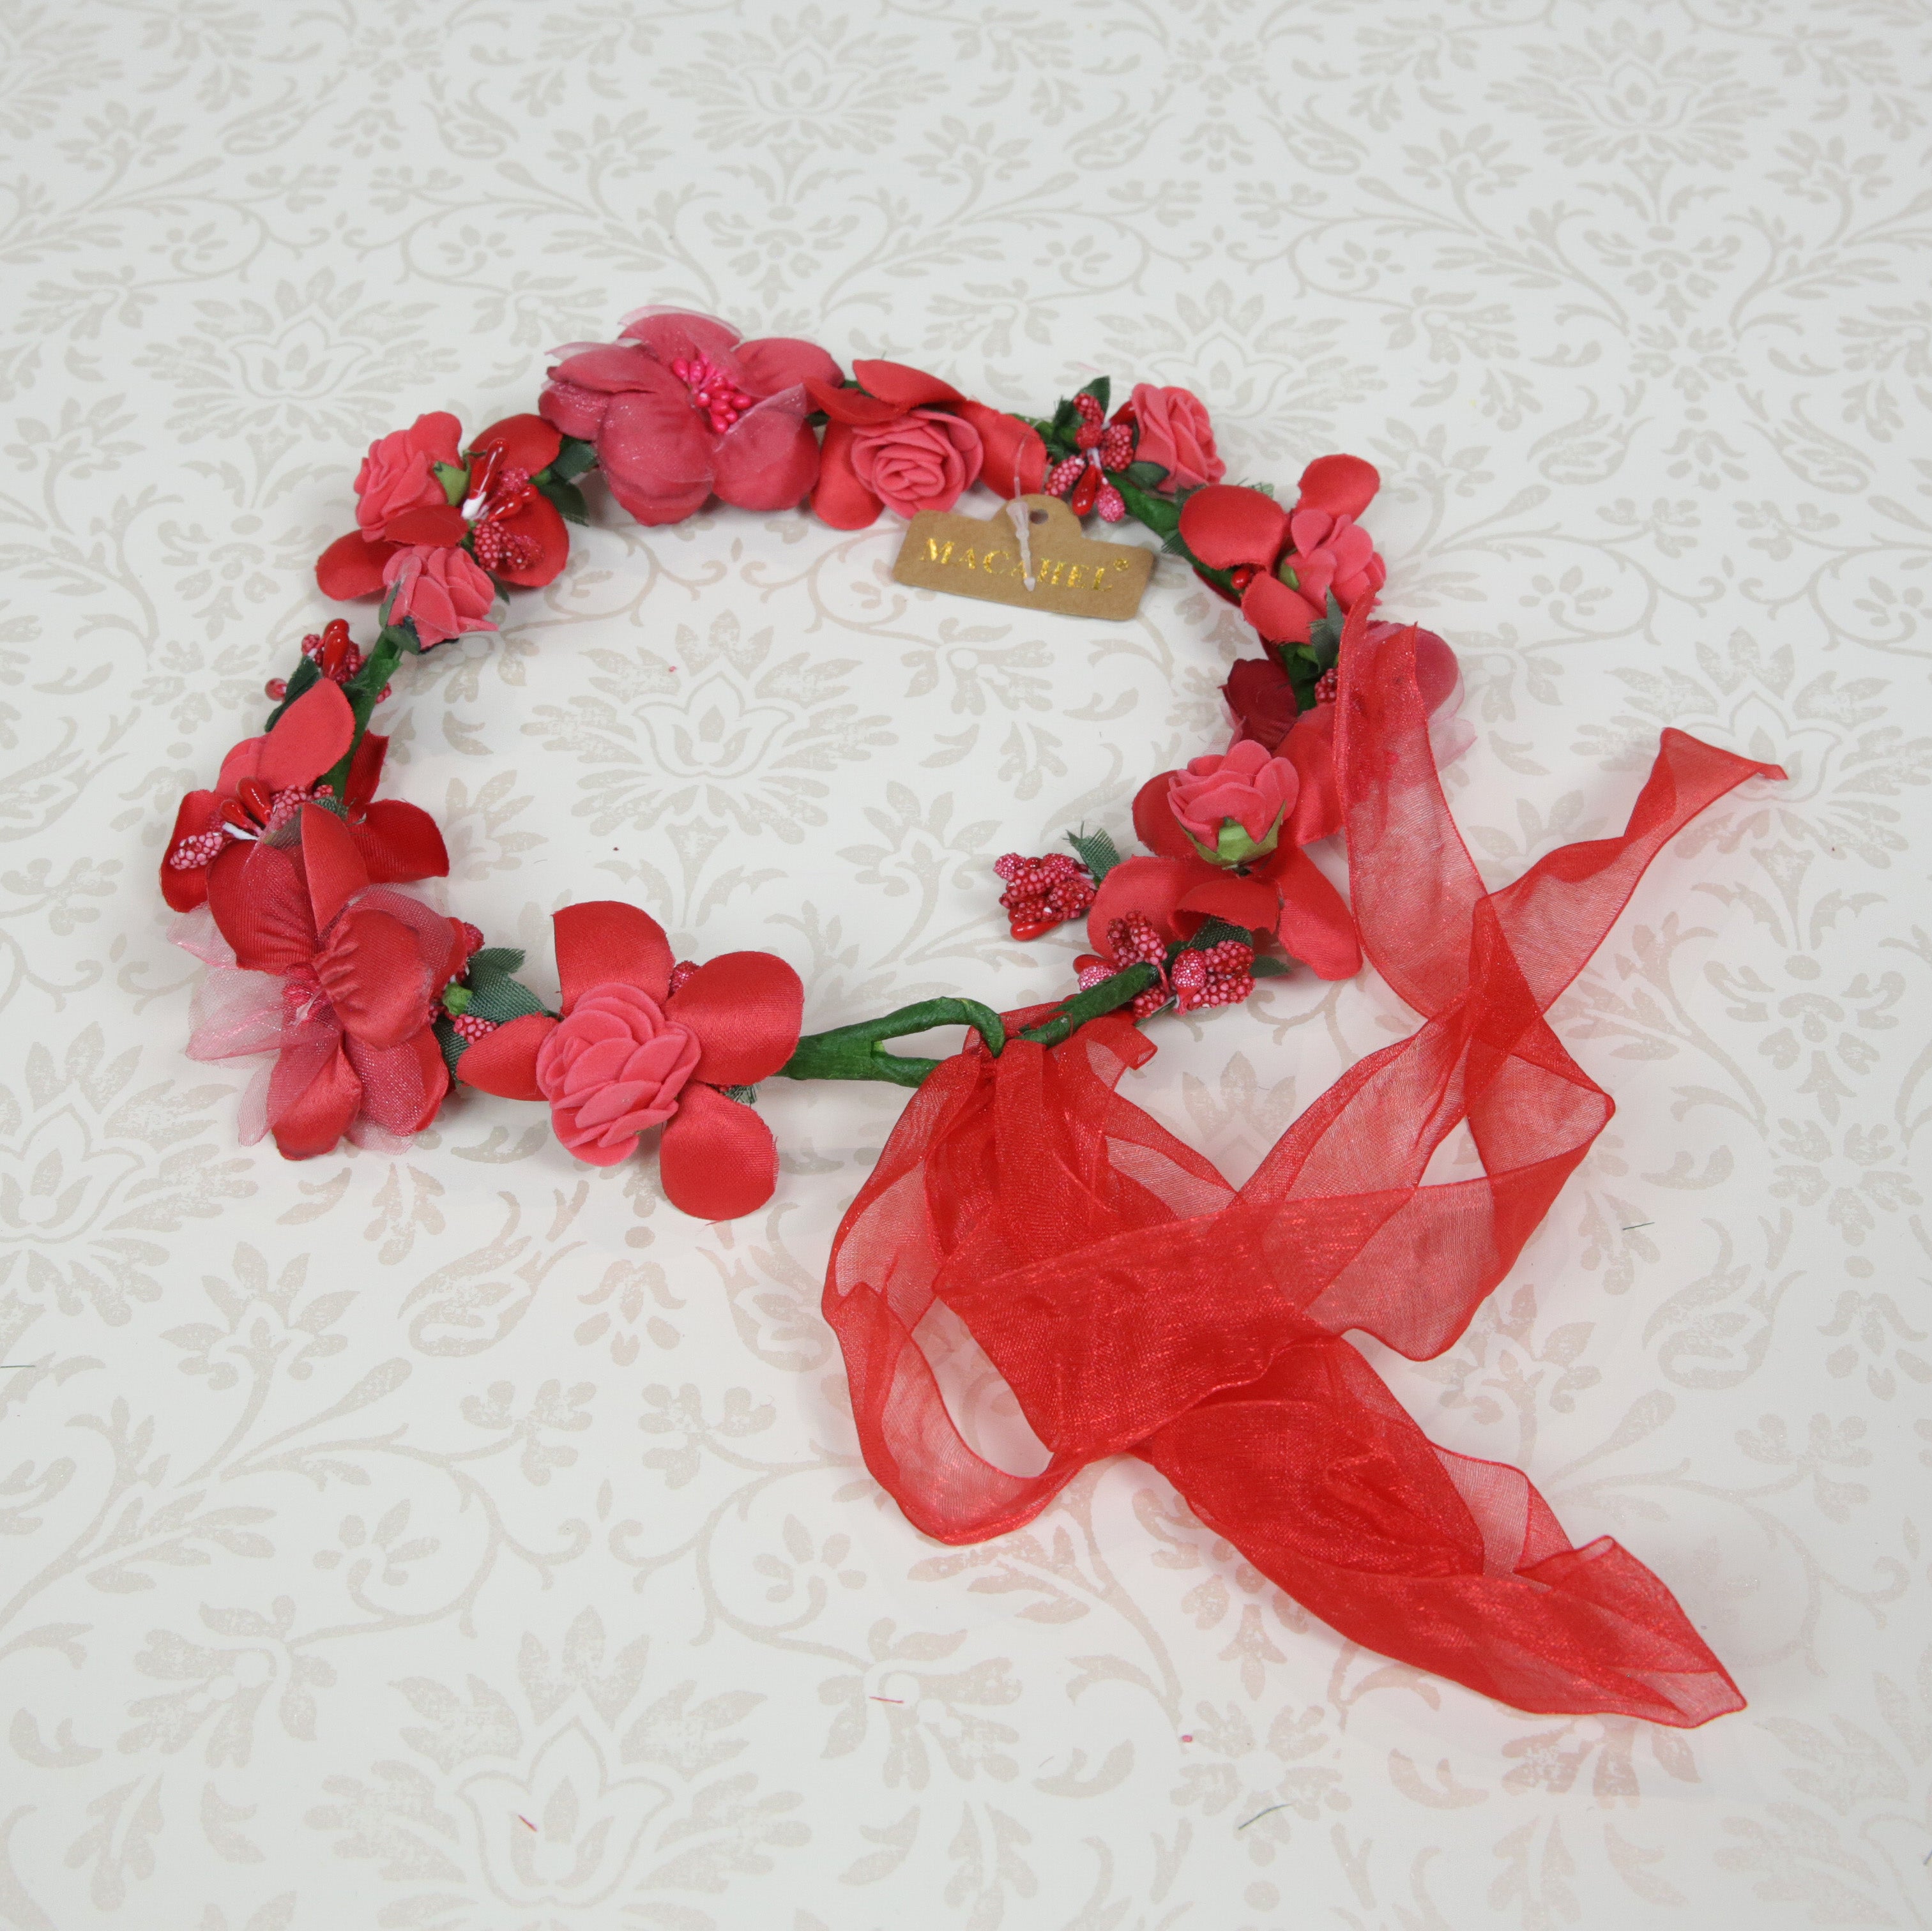 Miniature Roses Ribbon Flower Crowns - Pack of 12